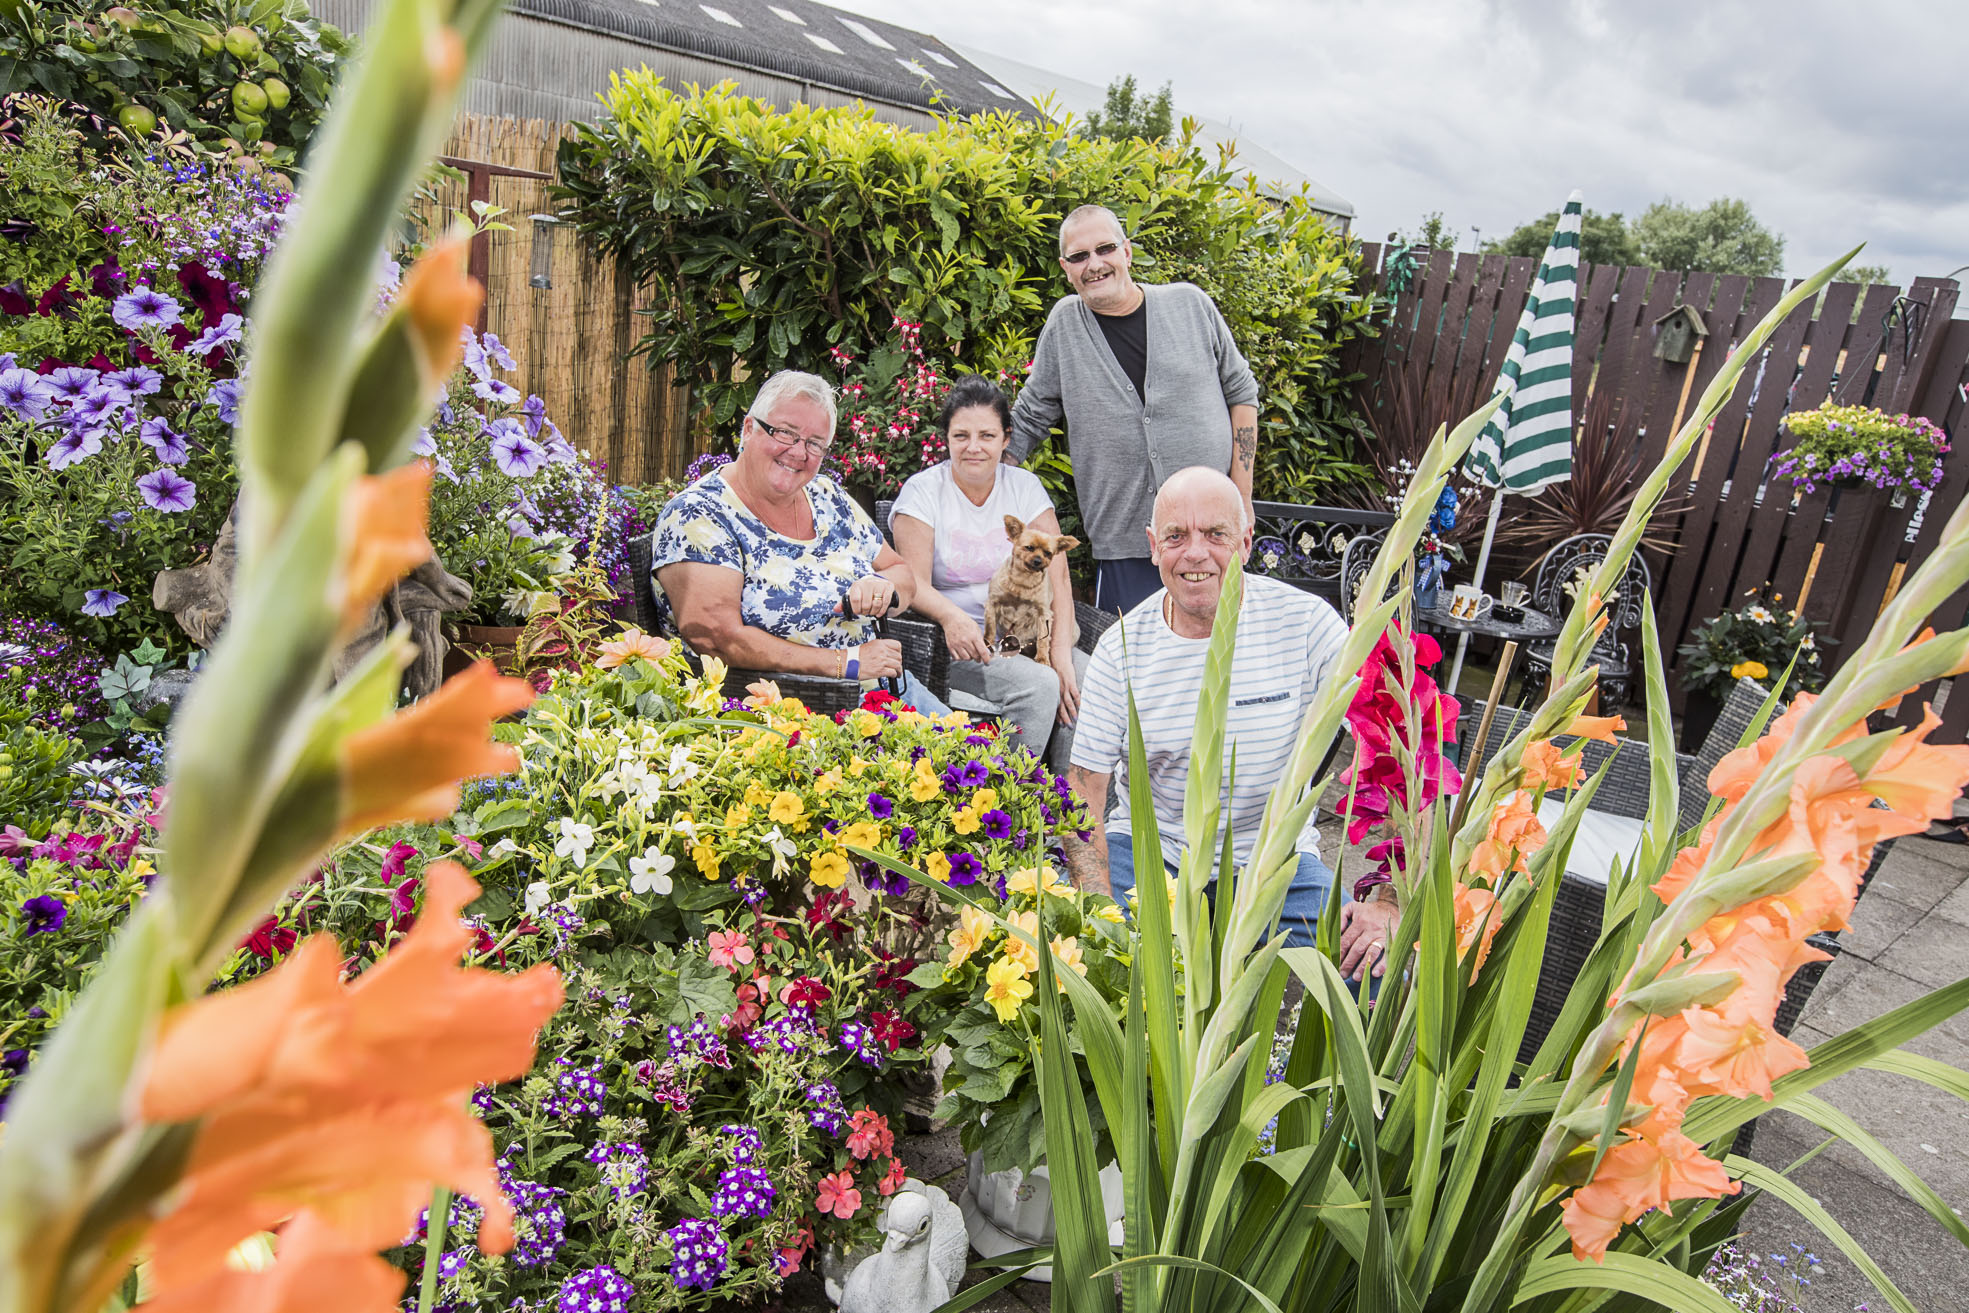 Green-fingered tenants dig their way to victory